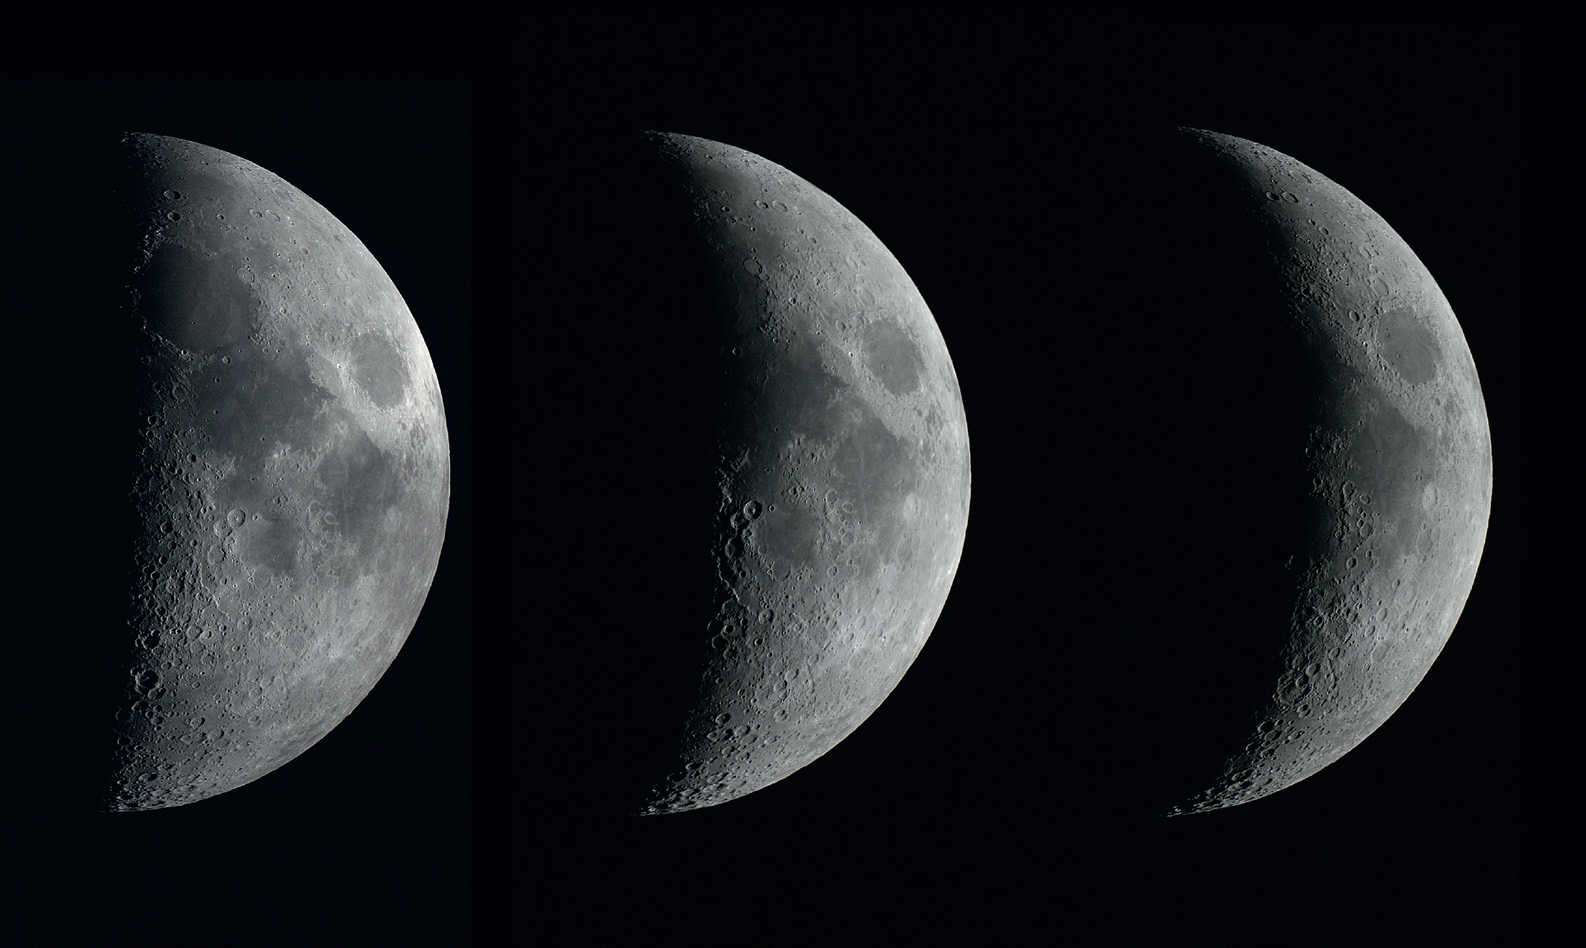 The phases of the waxing Moon over three consecutive days. The exposures were taken a day apart with a Canon 450D DSLR using a refractor with a 102 mm aperture and a focal length of 1,000 mm. U. Dittler